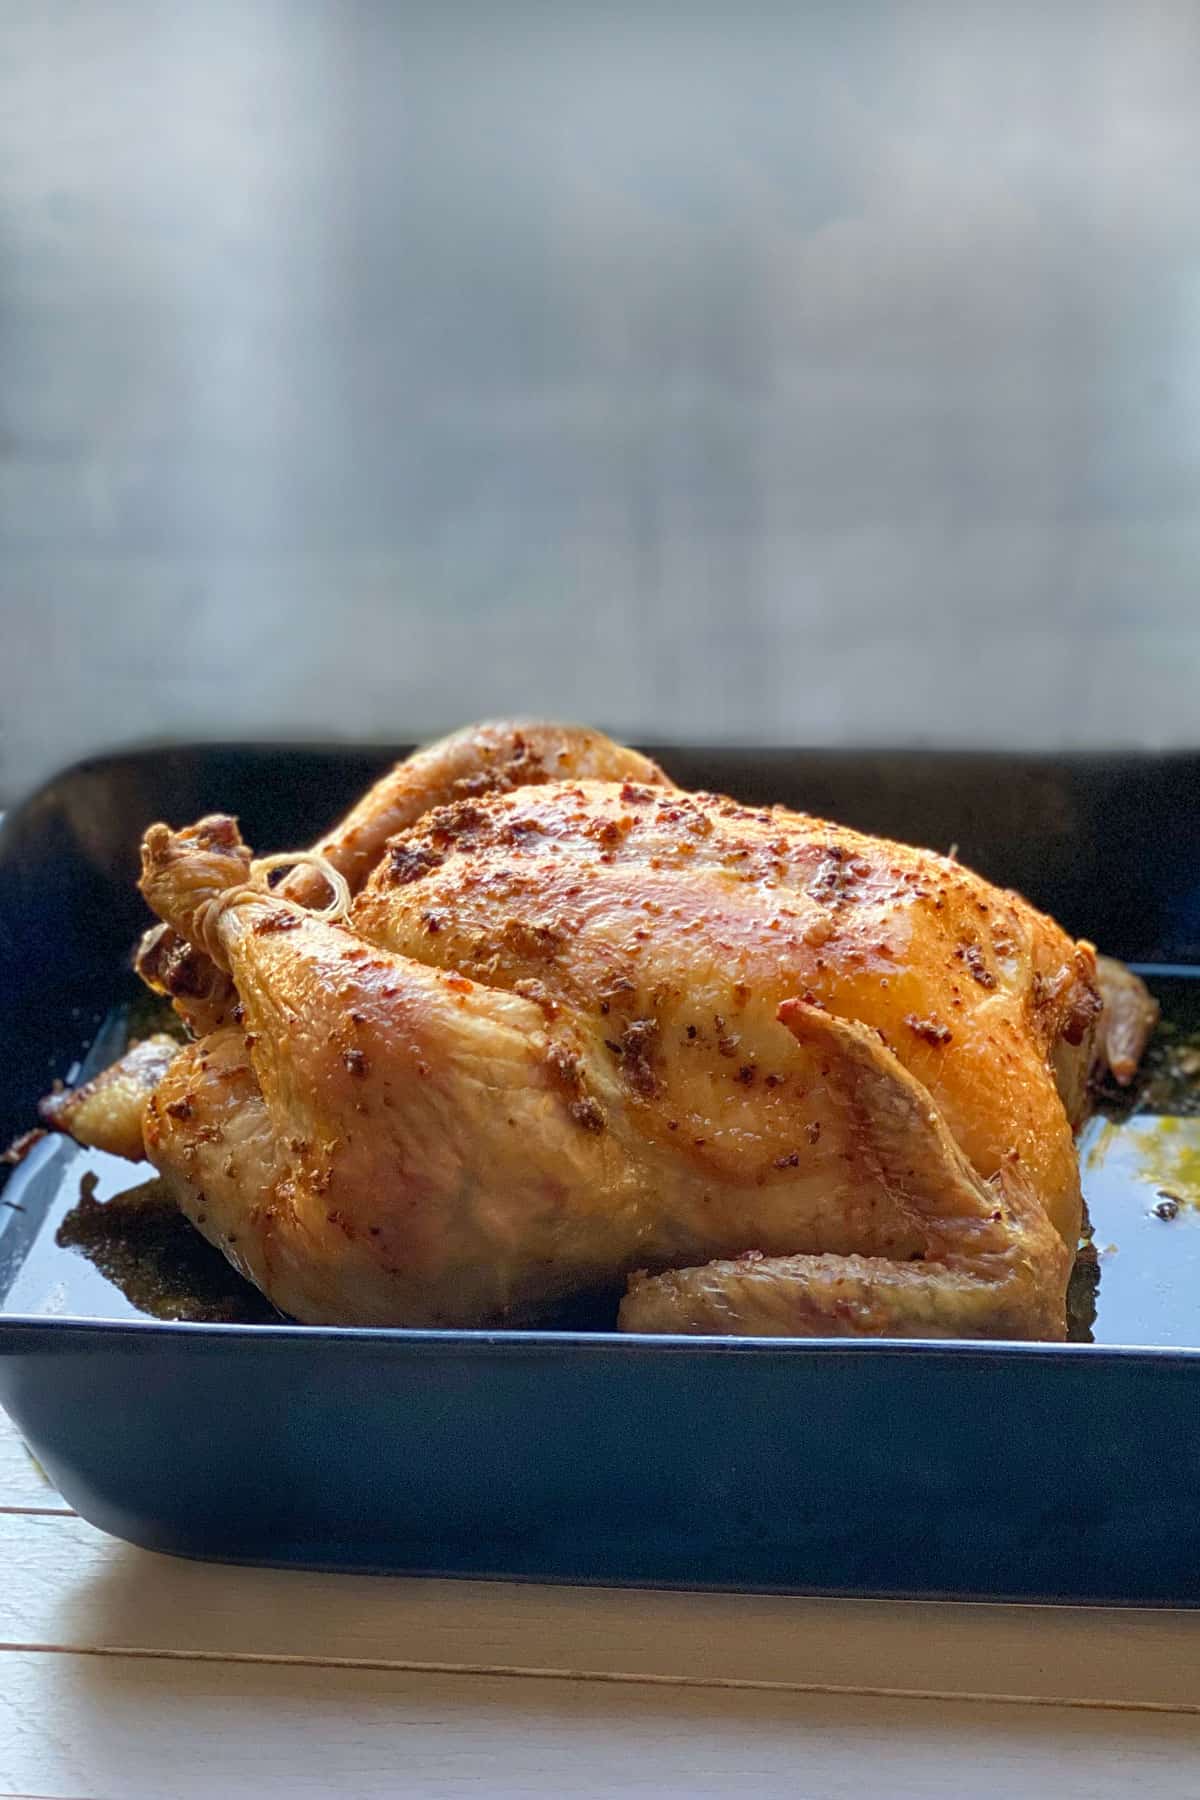 a whole slow roasted chicken in a black roasting pan, seen from the side